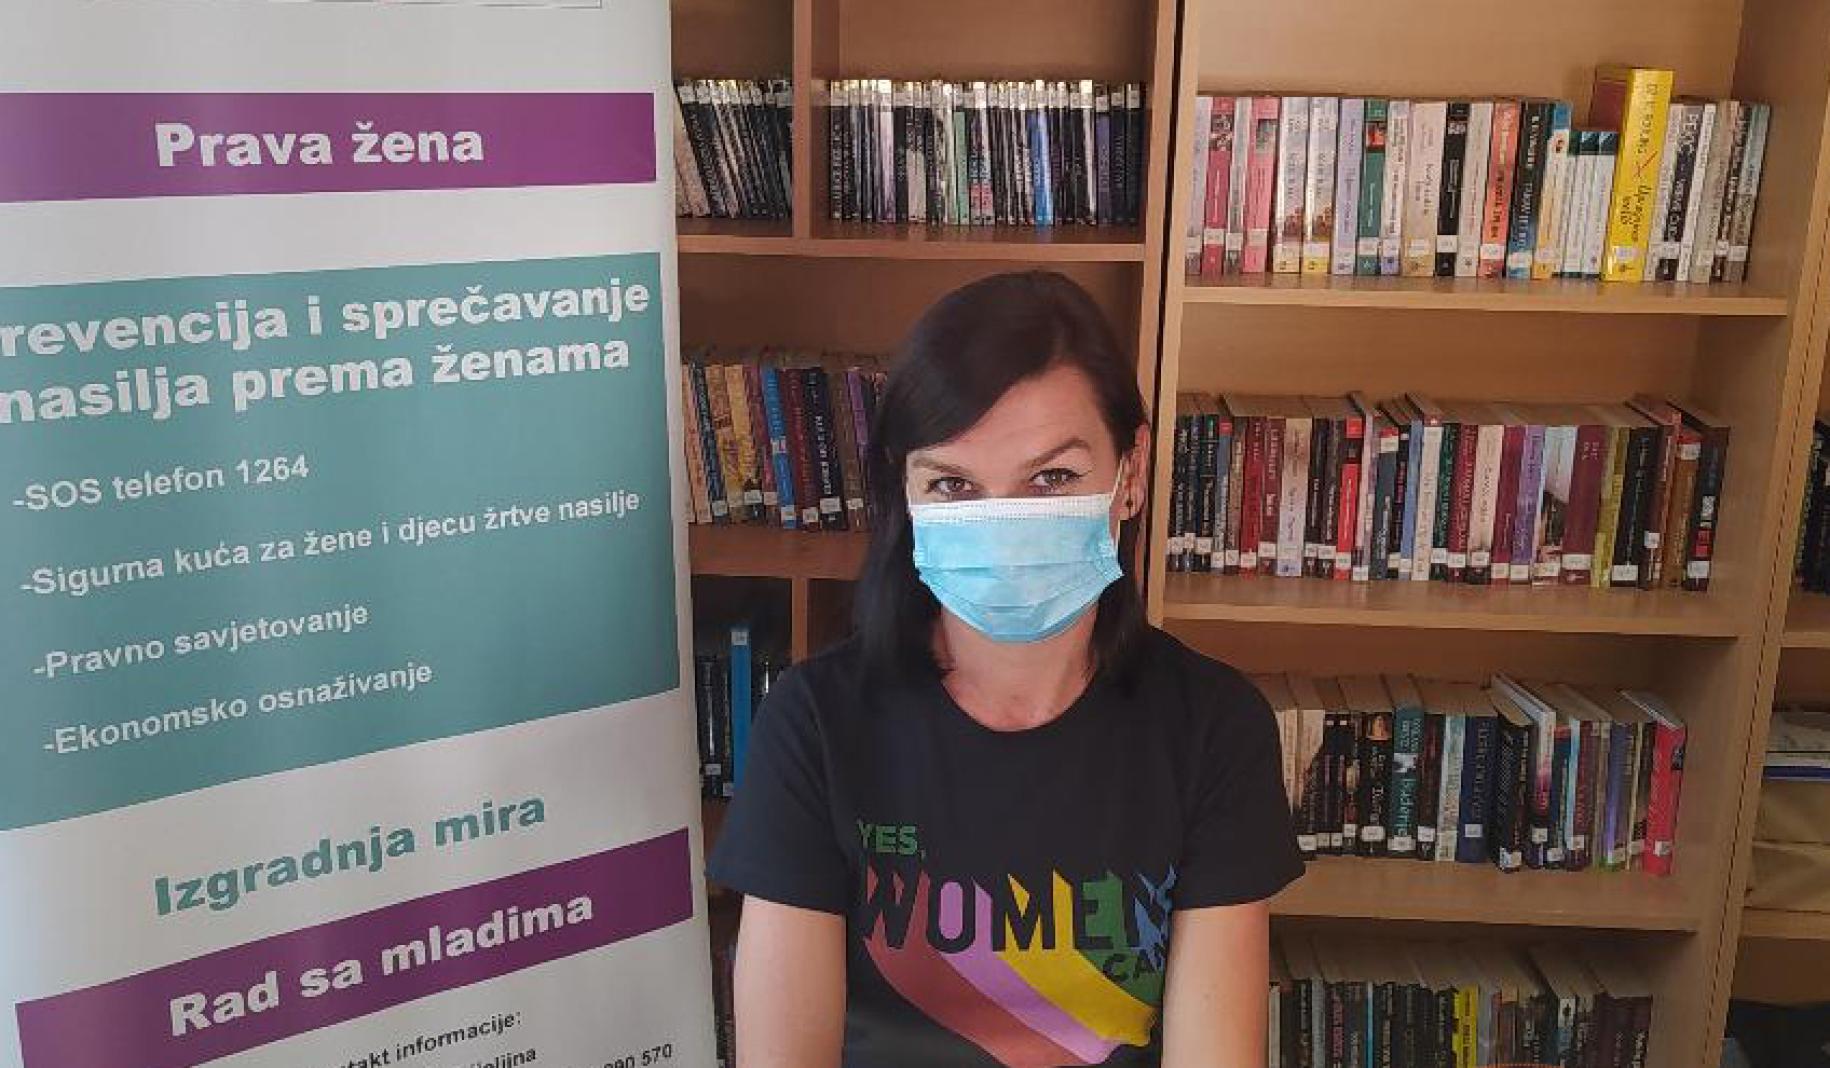 Dragana Petric sits in front a book shelf and signage at the Lara Bijeljina Foundation.